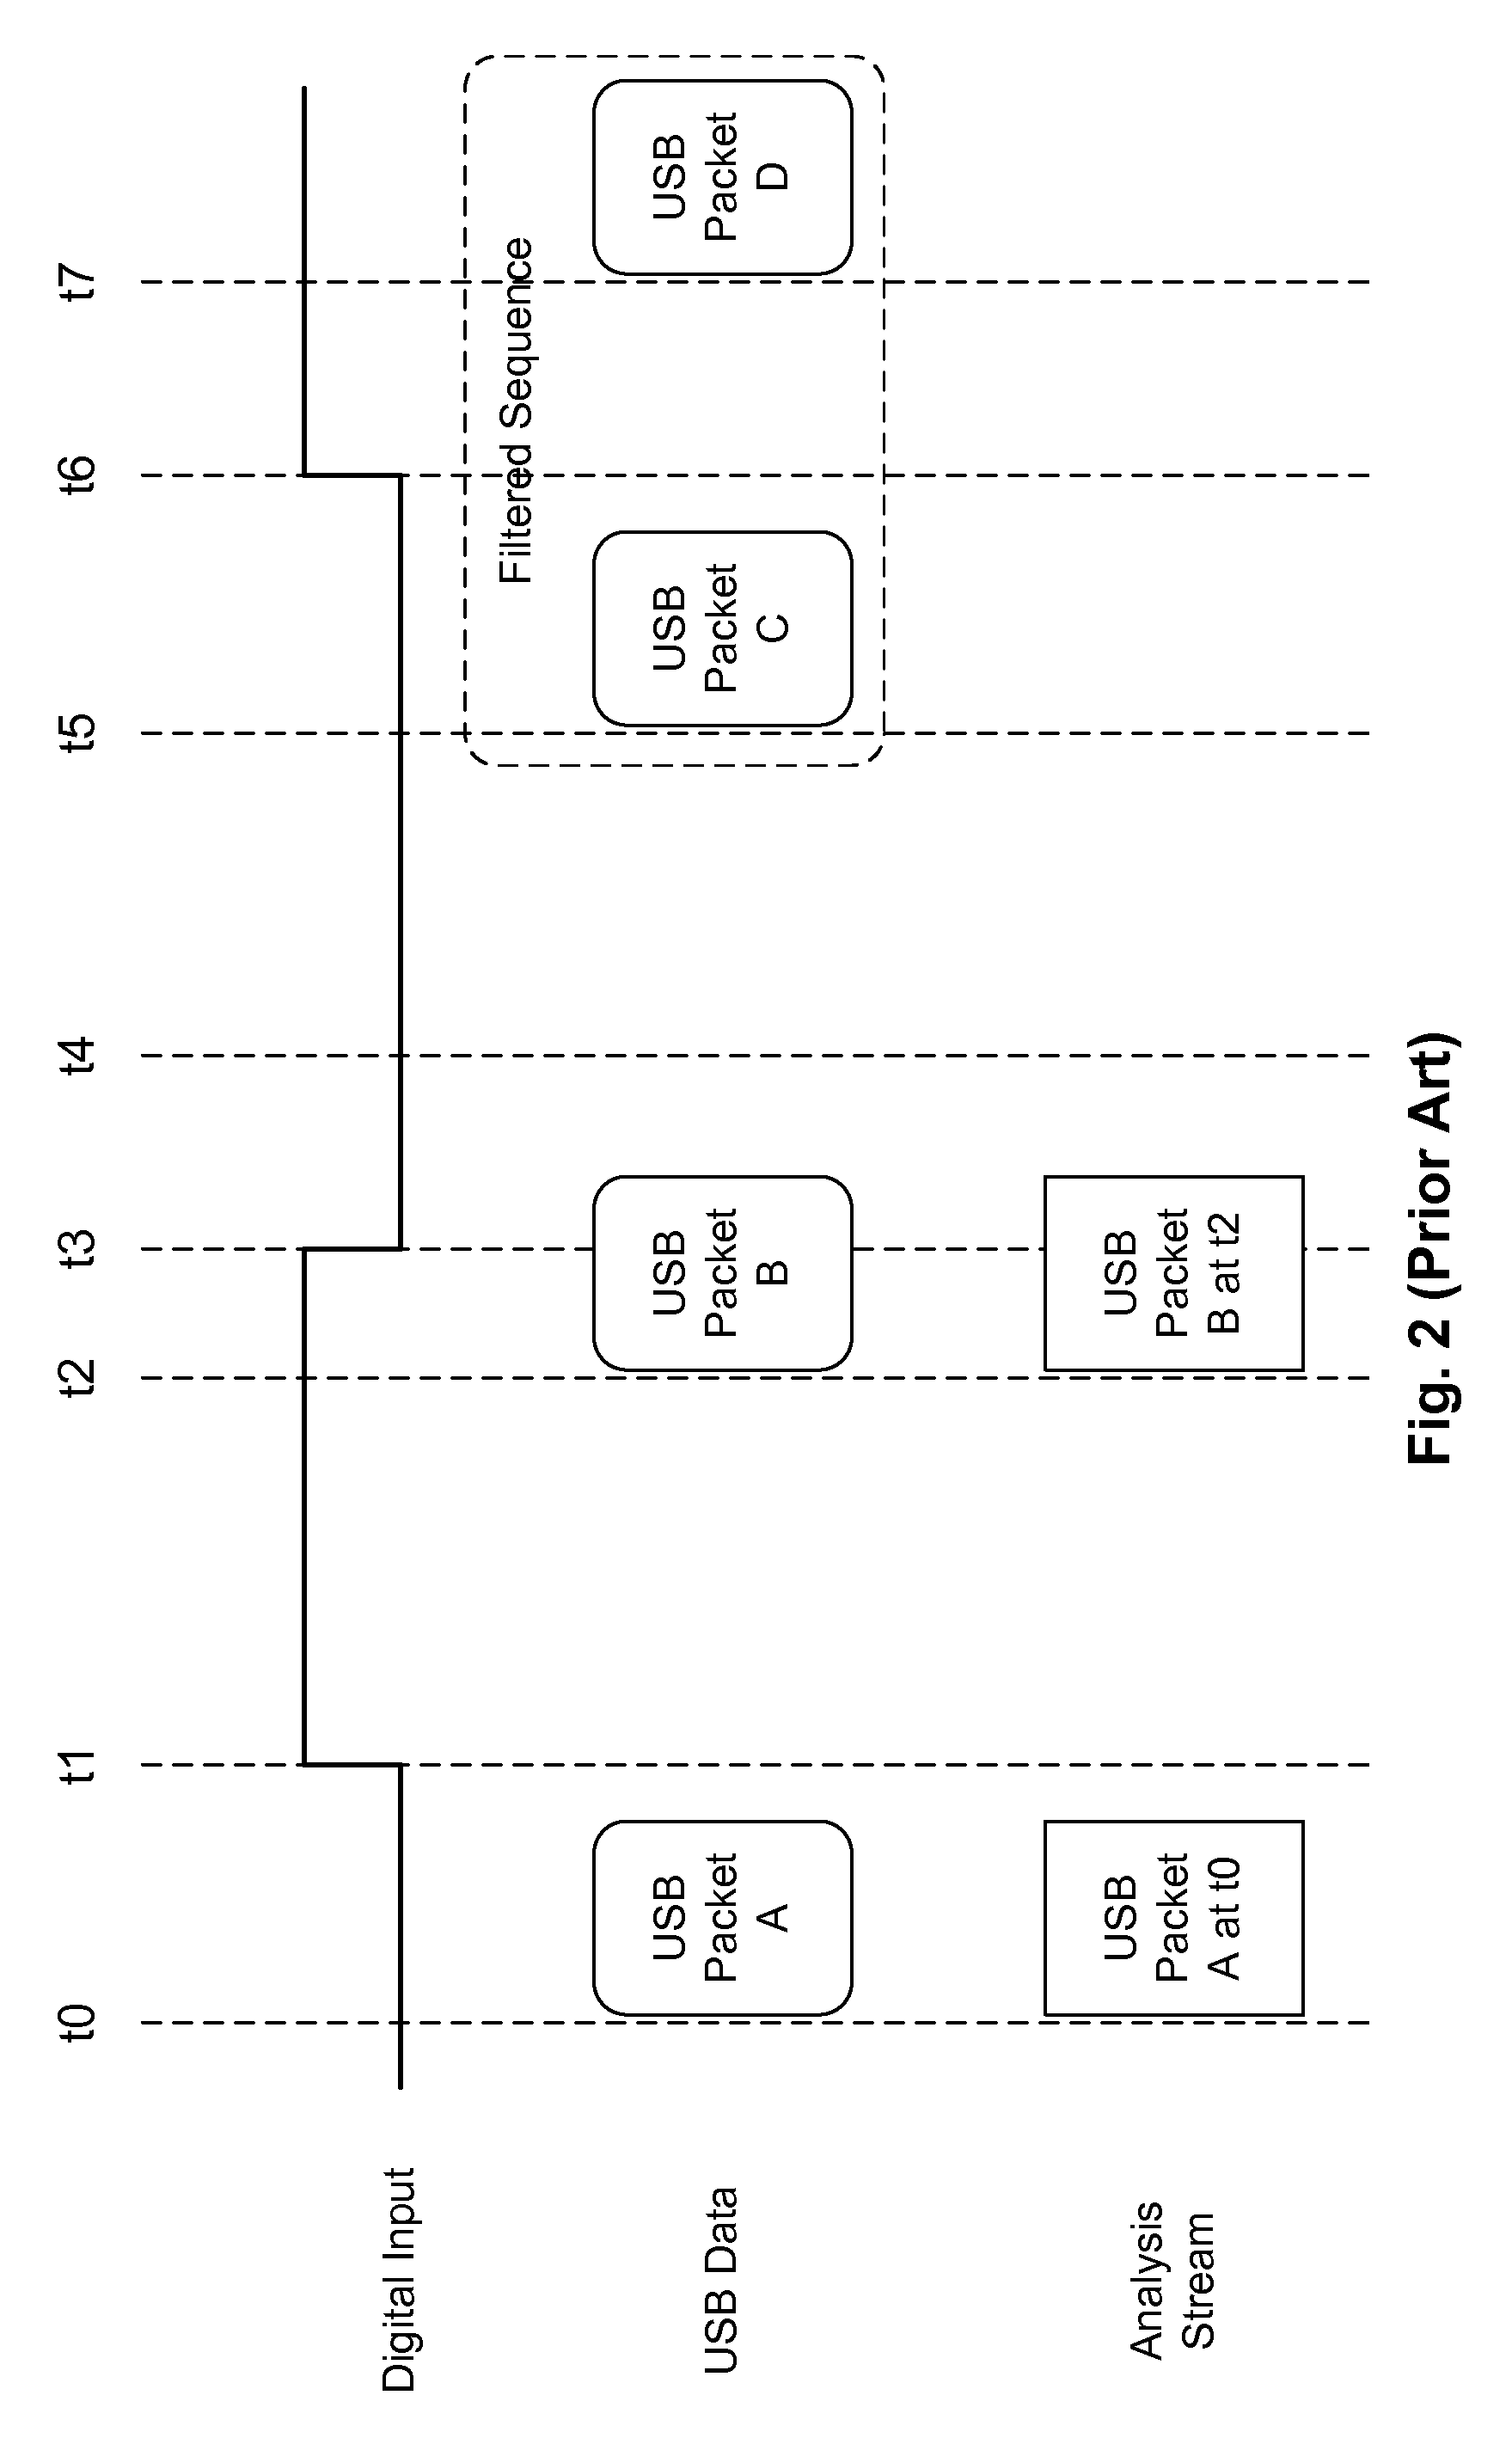 Methods for embedding an out-of-band signal into a USB capture stream